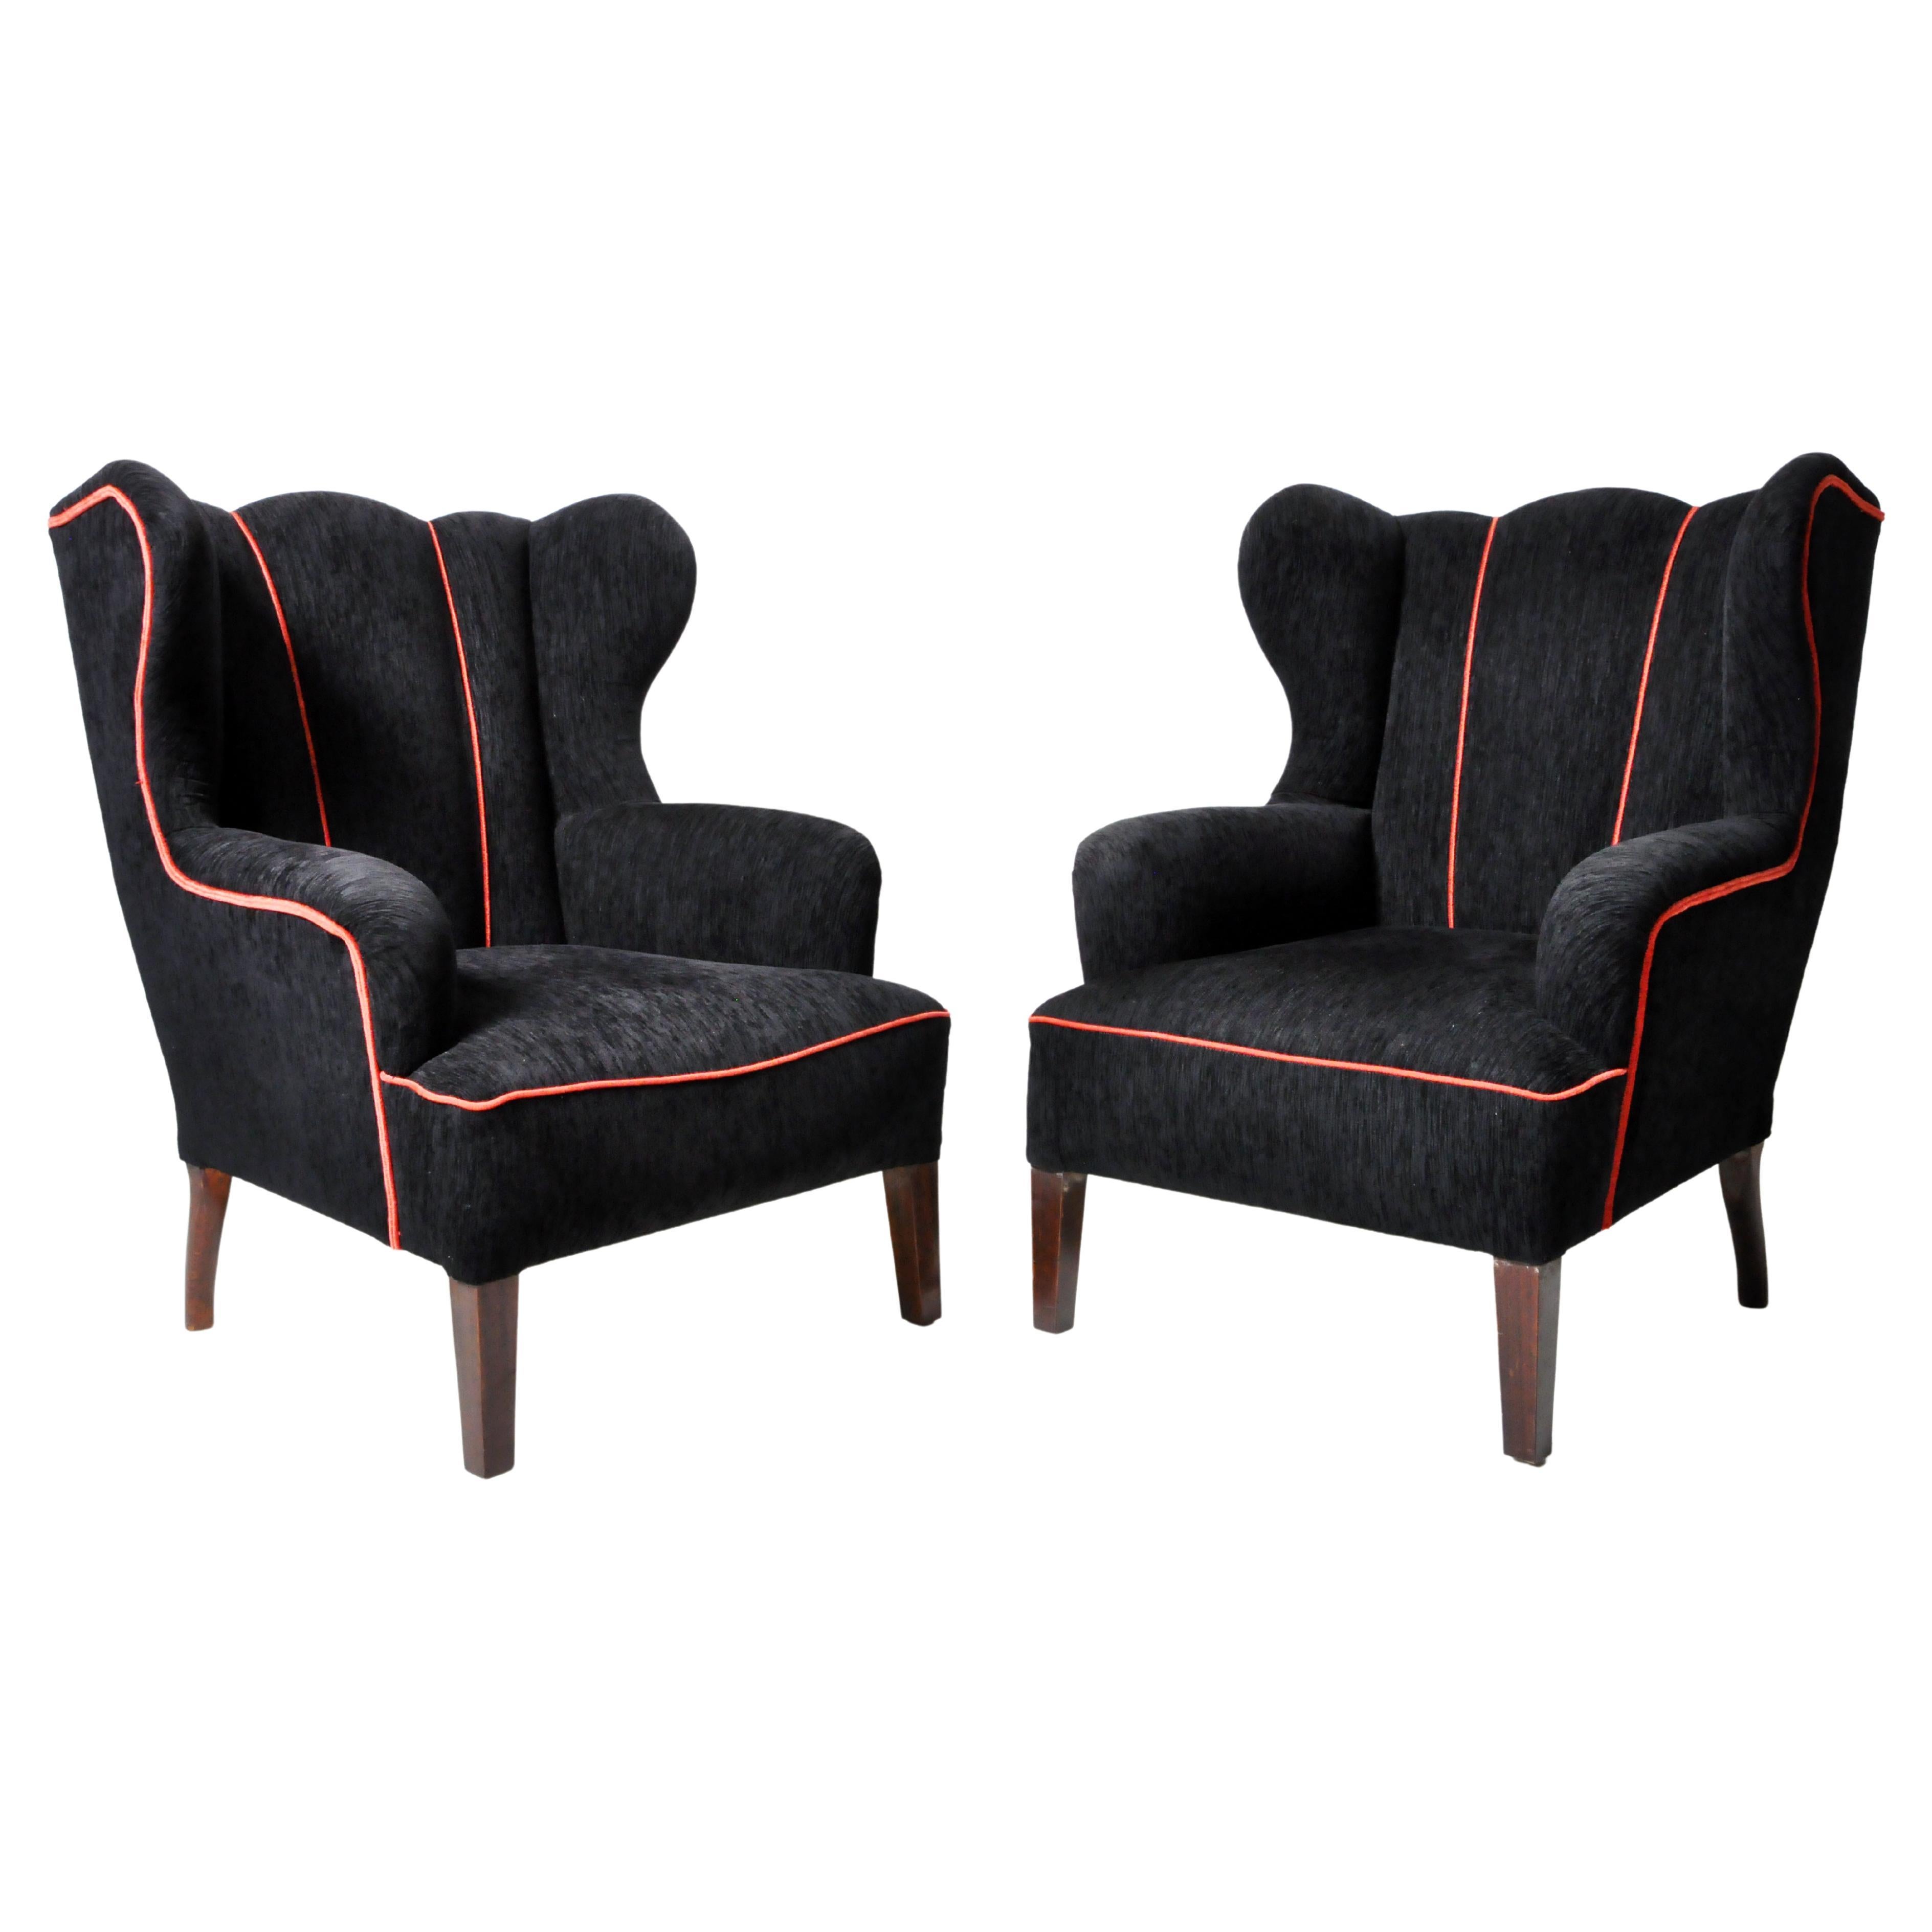 Pair of Wingback Chairs with Grey Upholstery